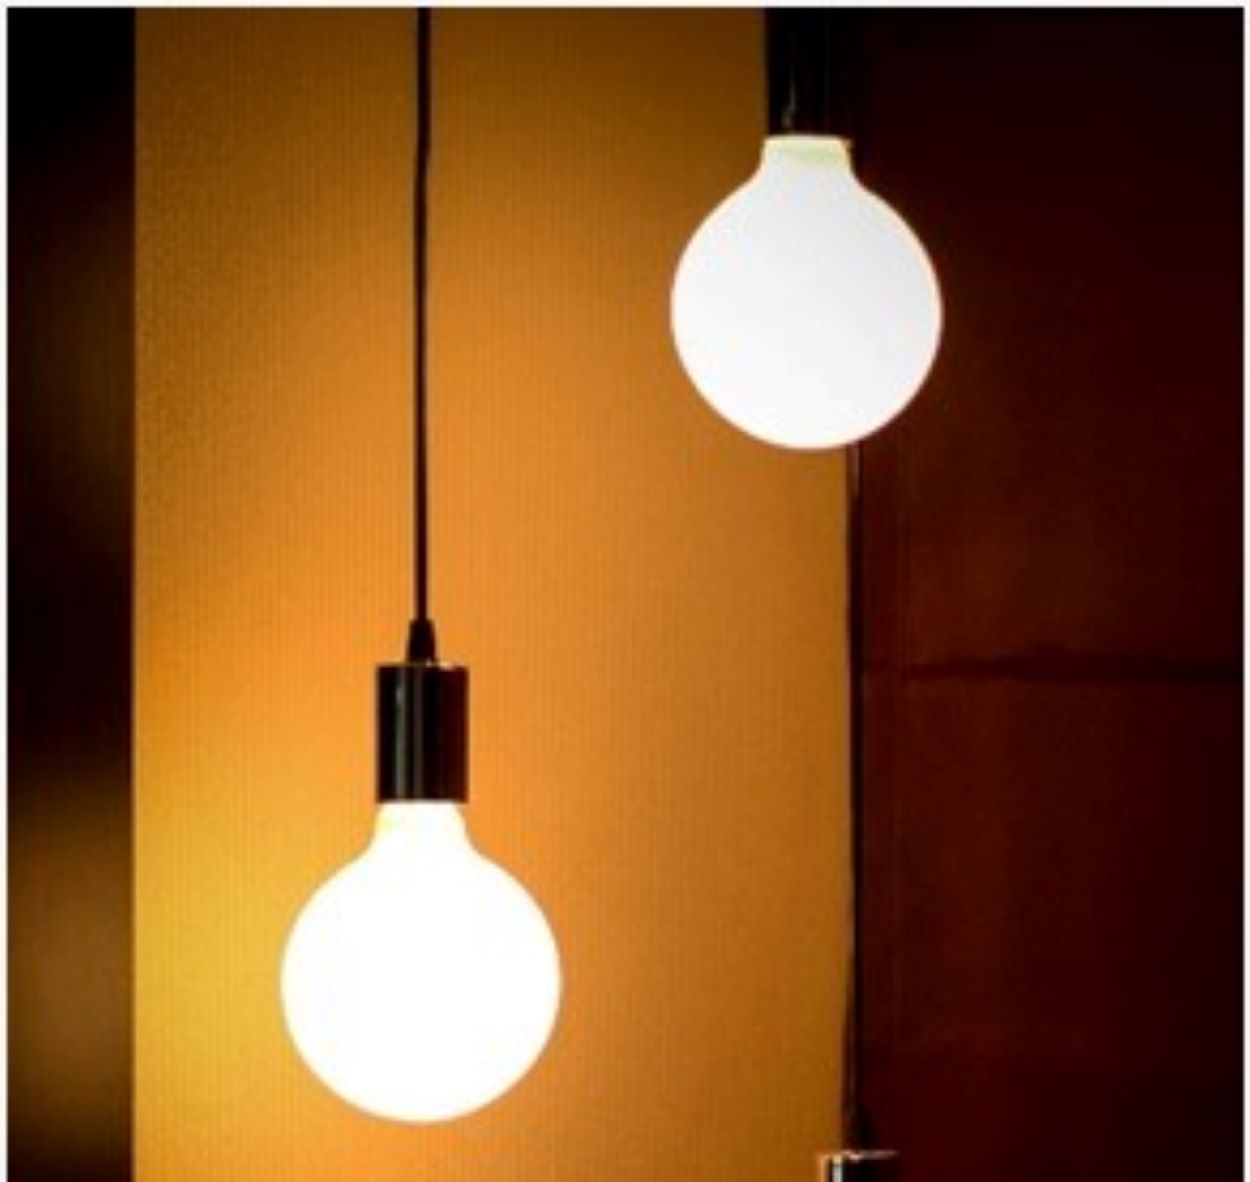 LED bulbs with lower color temperatures produce a yellowish light.